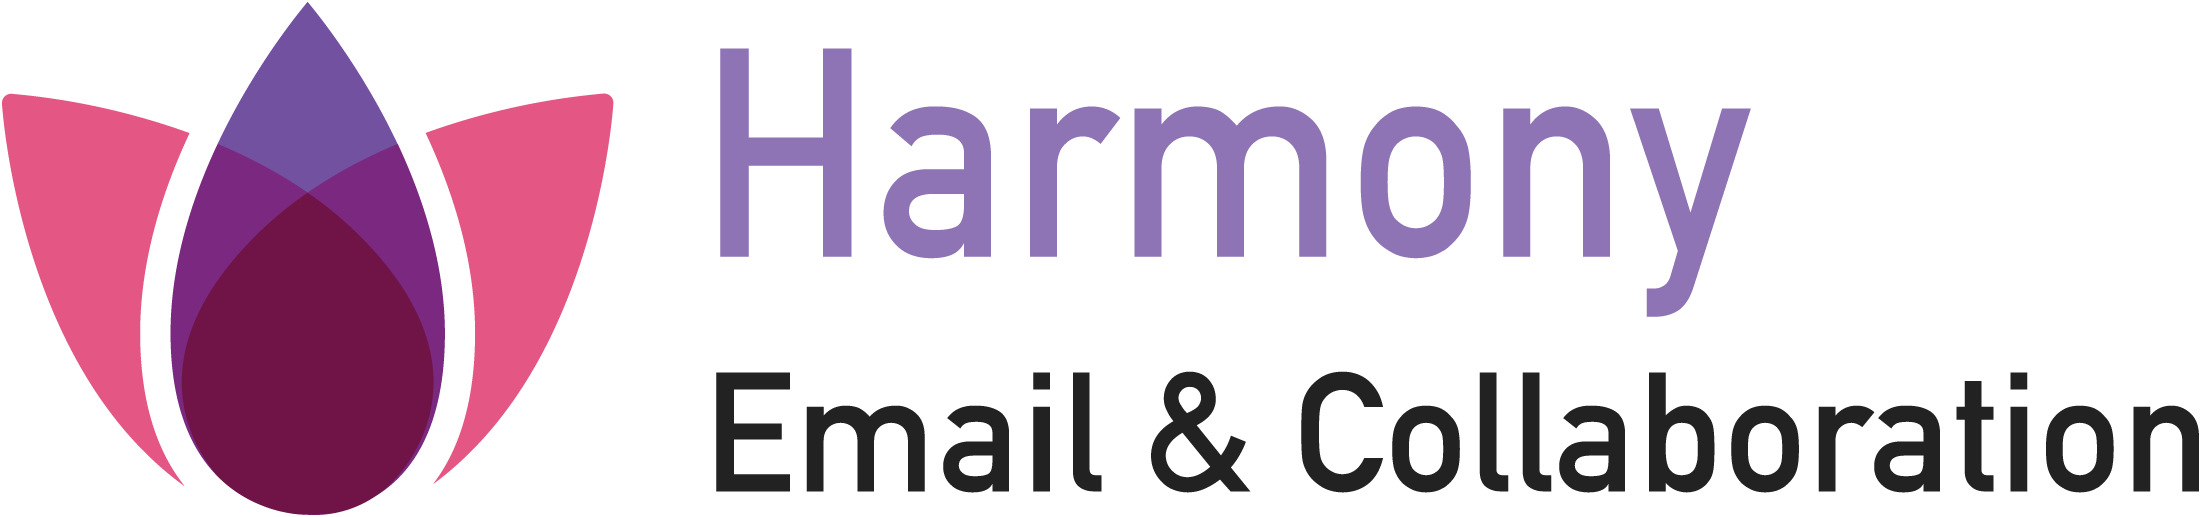 Harmony Email & Collaboration